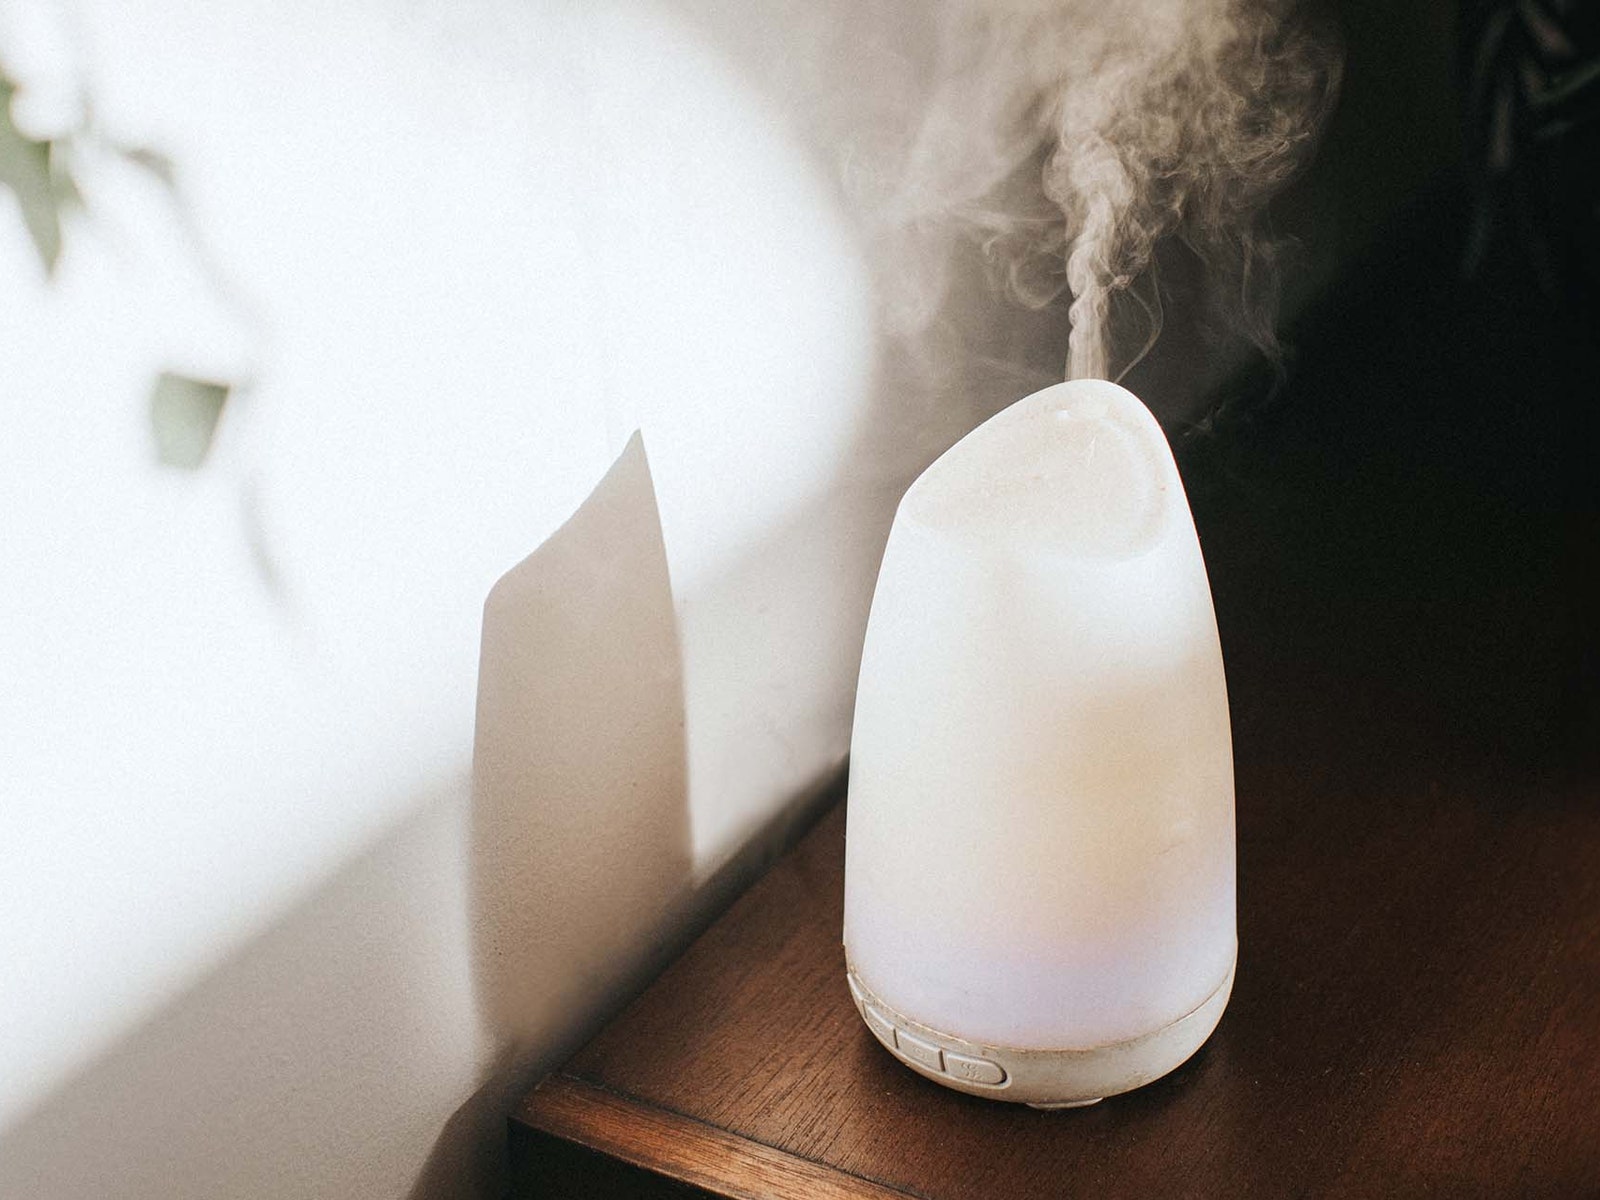 Want to treat your home to an electric diffuser? These 15 get our vote